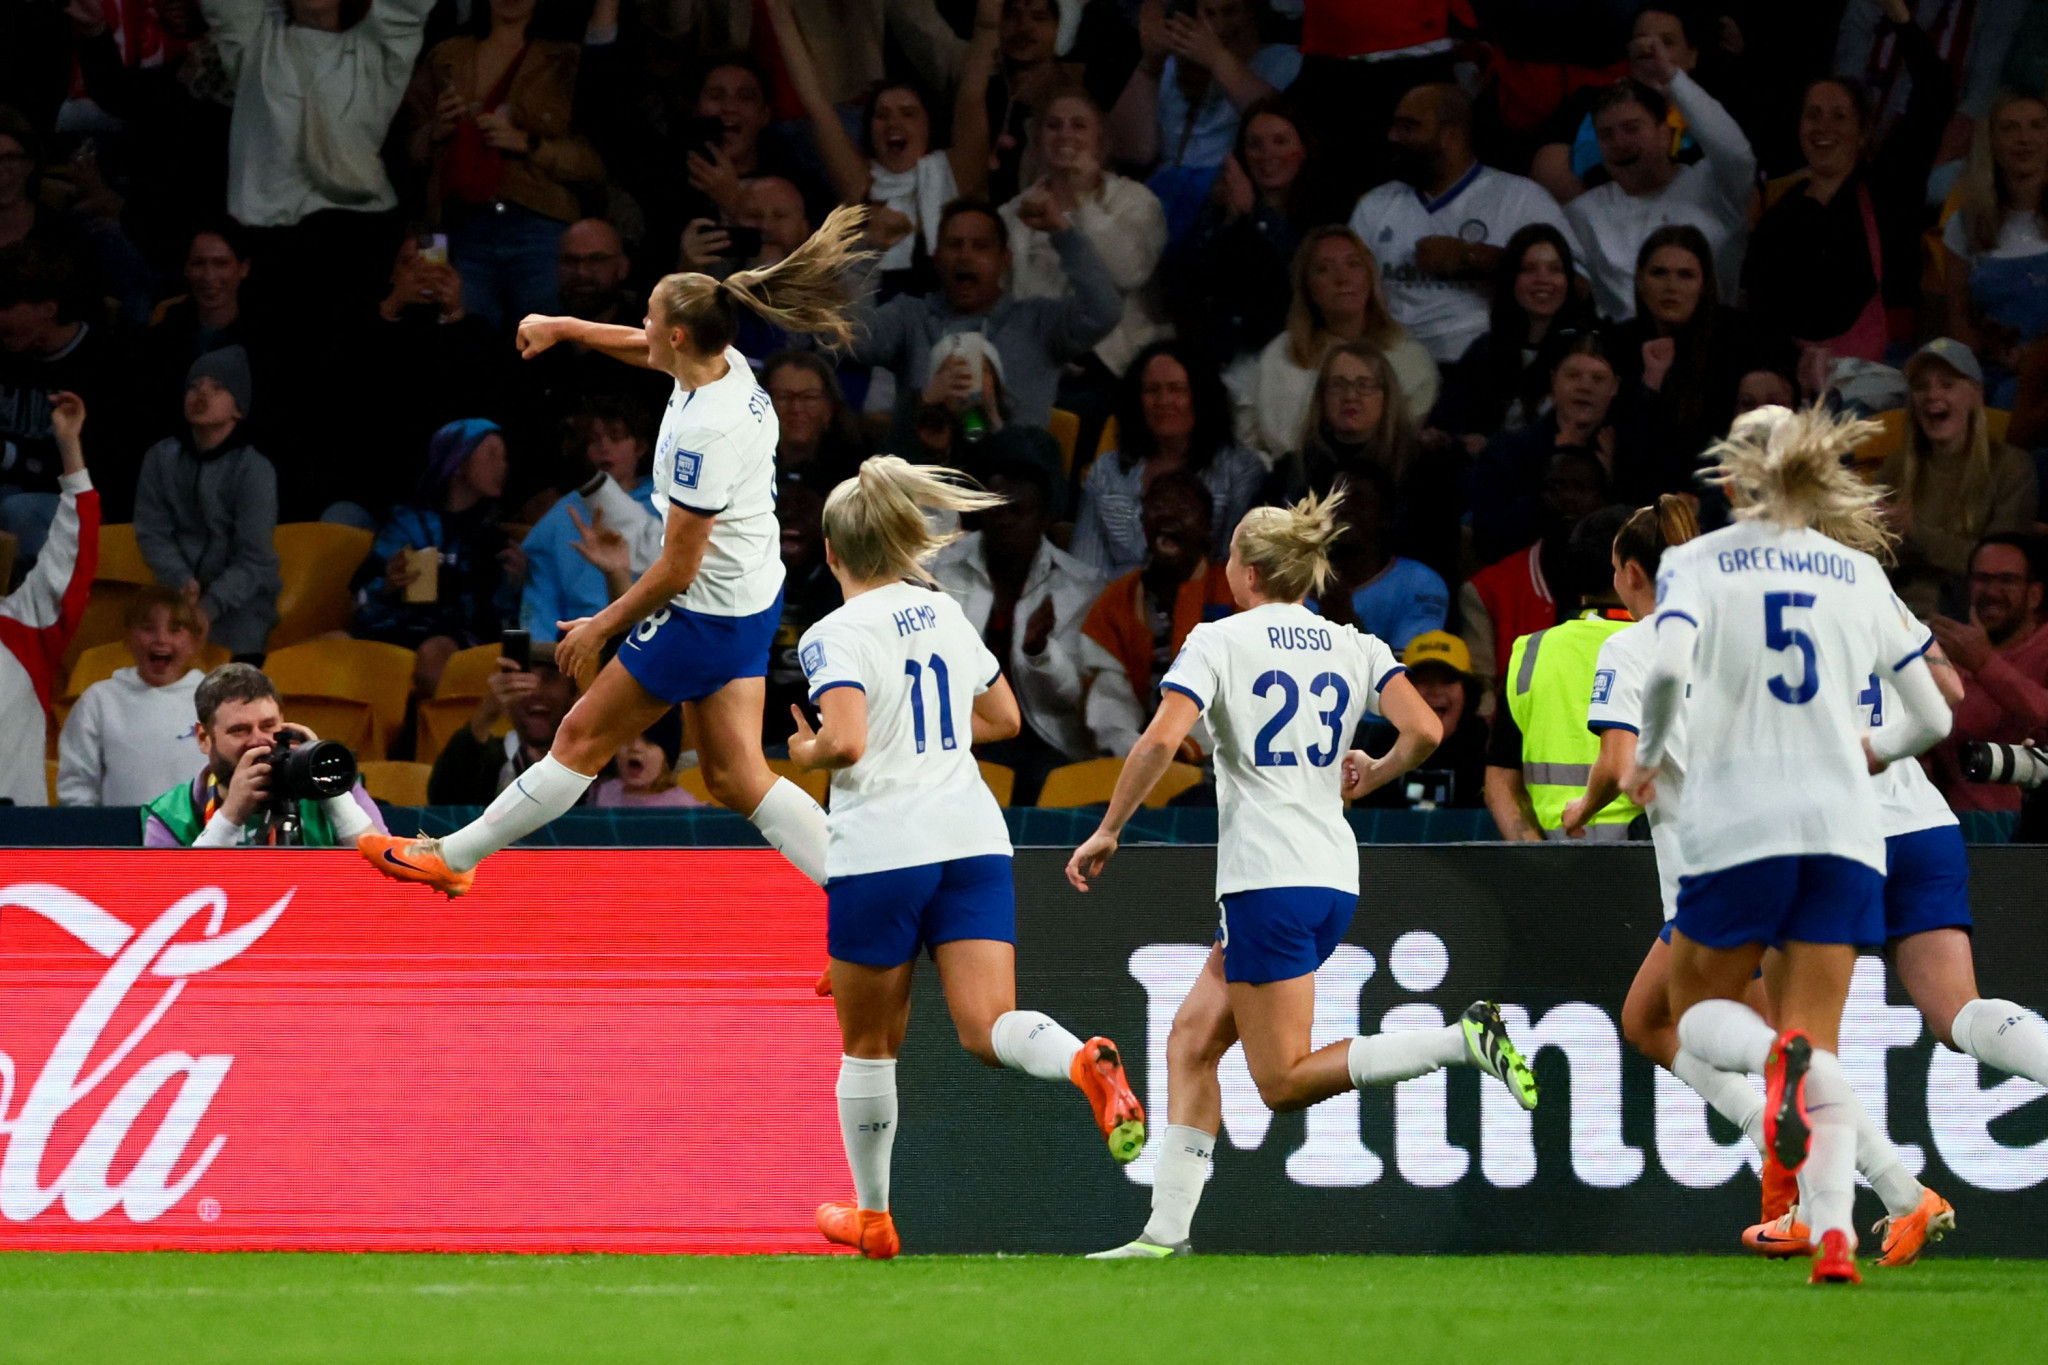 A peak audience of 4.2 million on ITV watched England beat Haiti in their first match of the FIFA Women's World Cup ©Getty Images